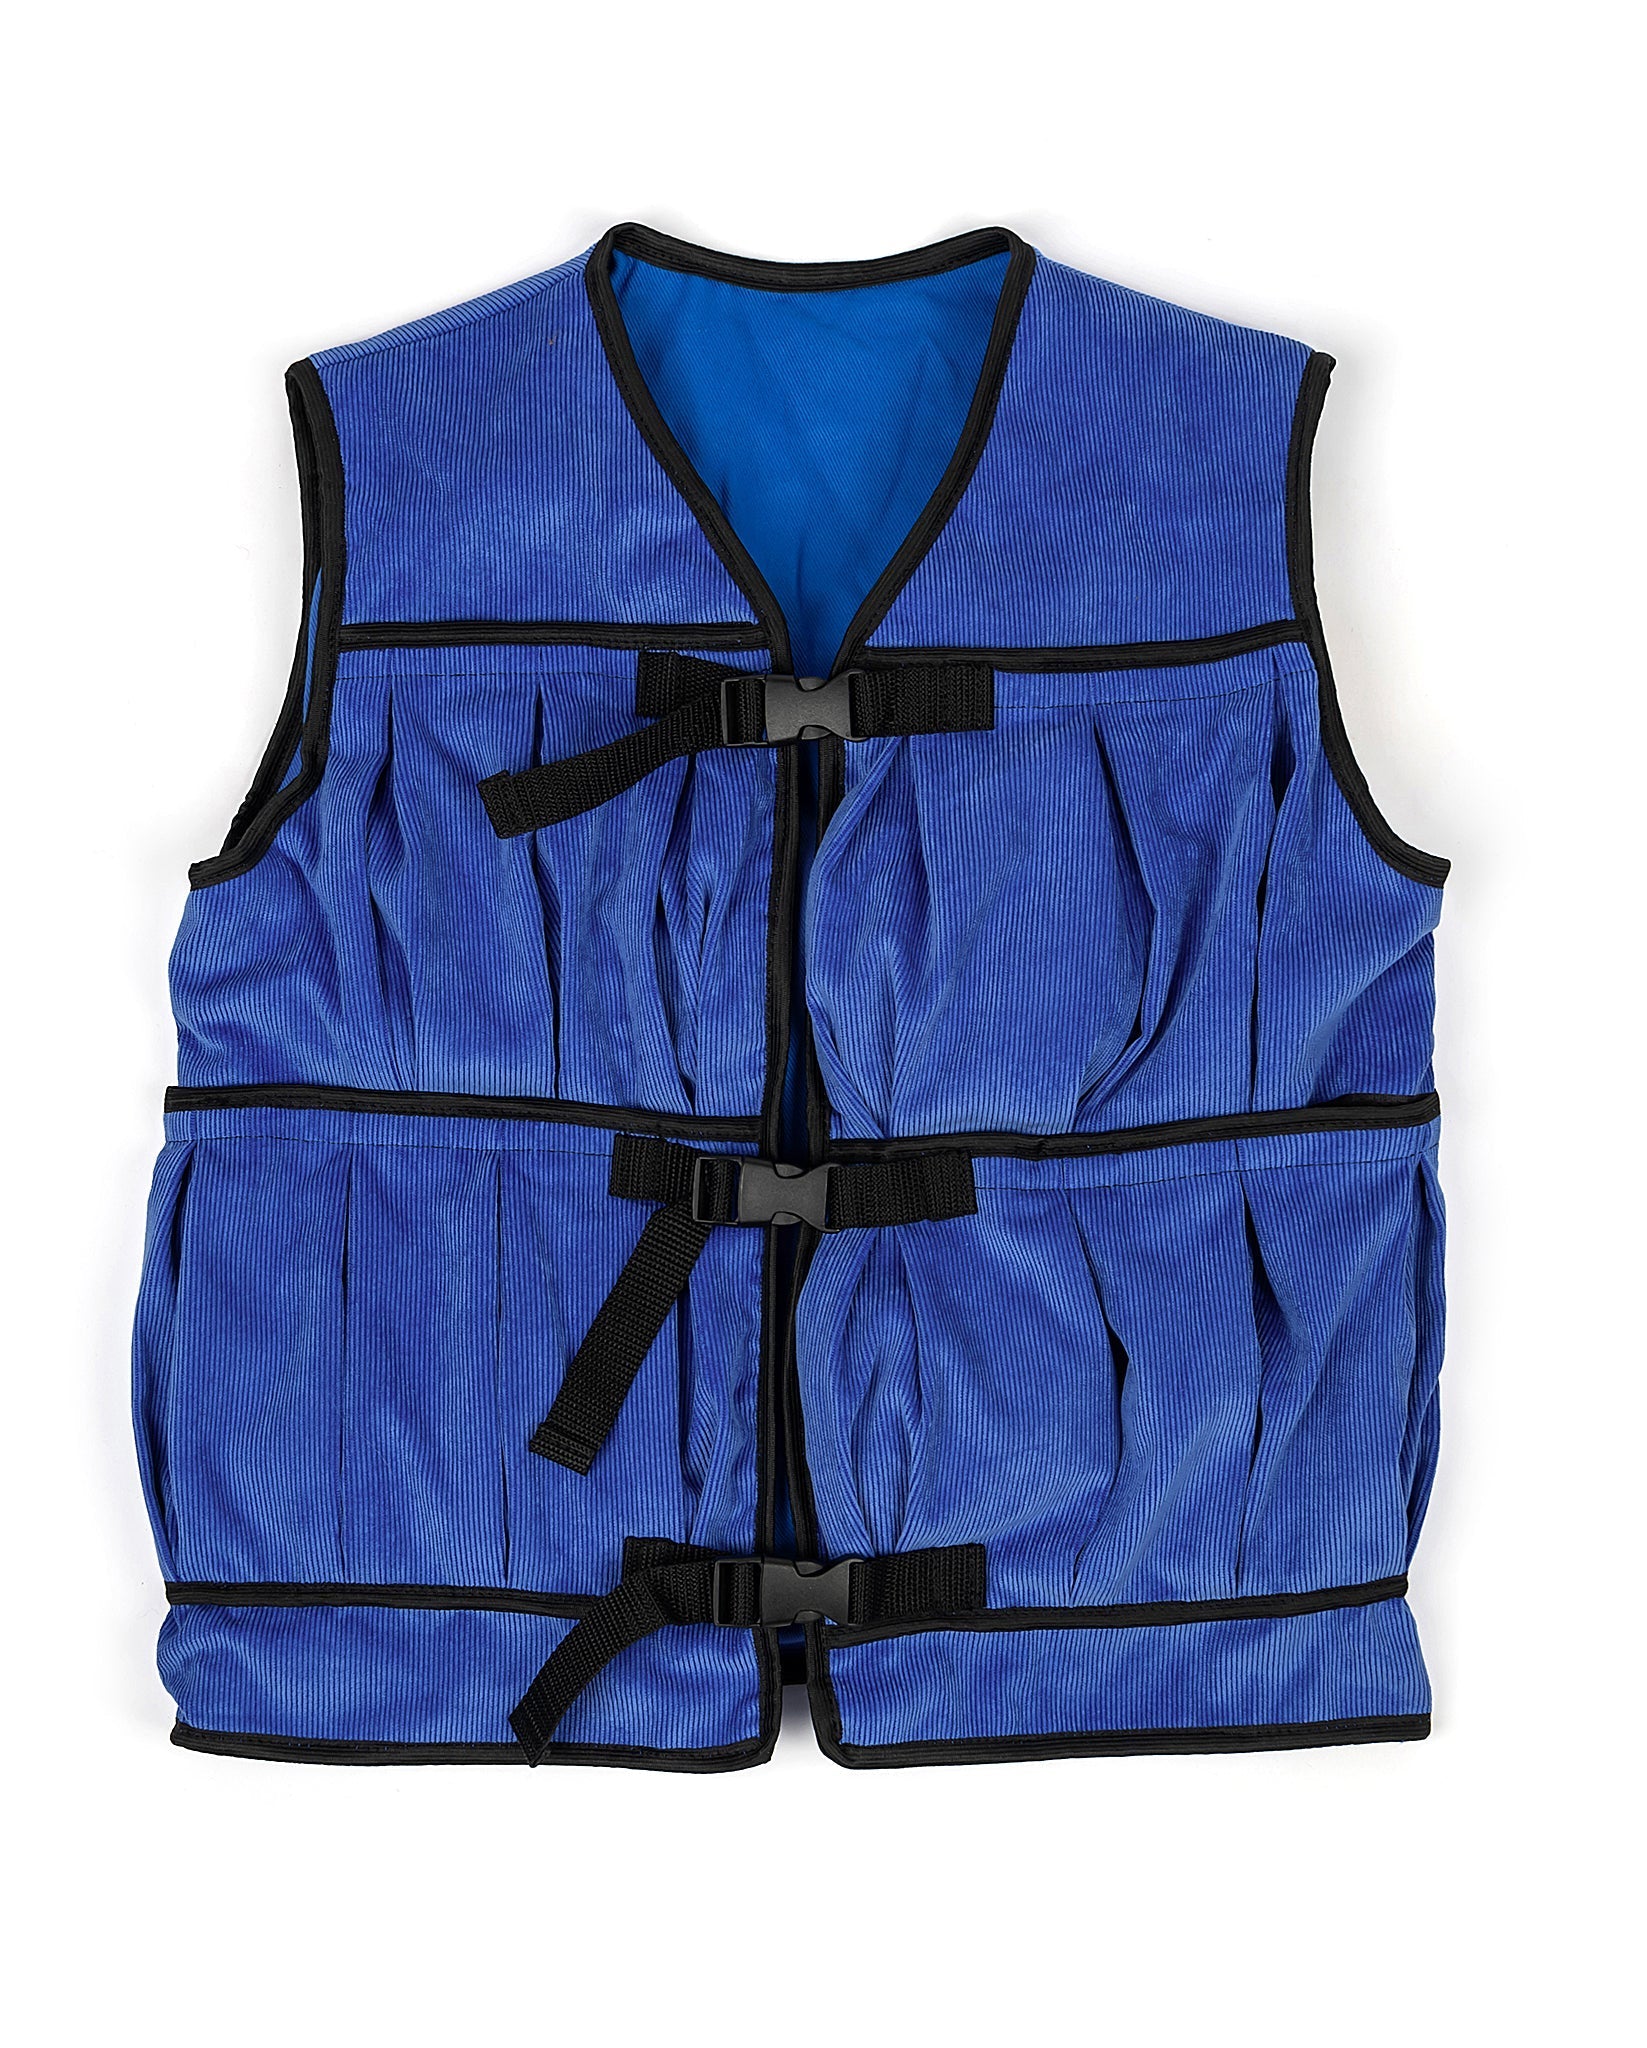 Ot Weighted Therapy Vest - L Red